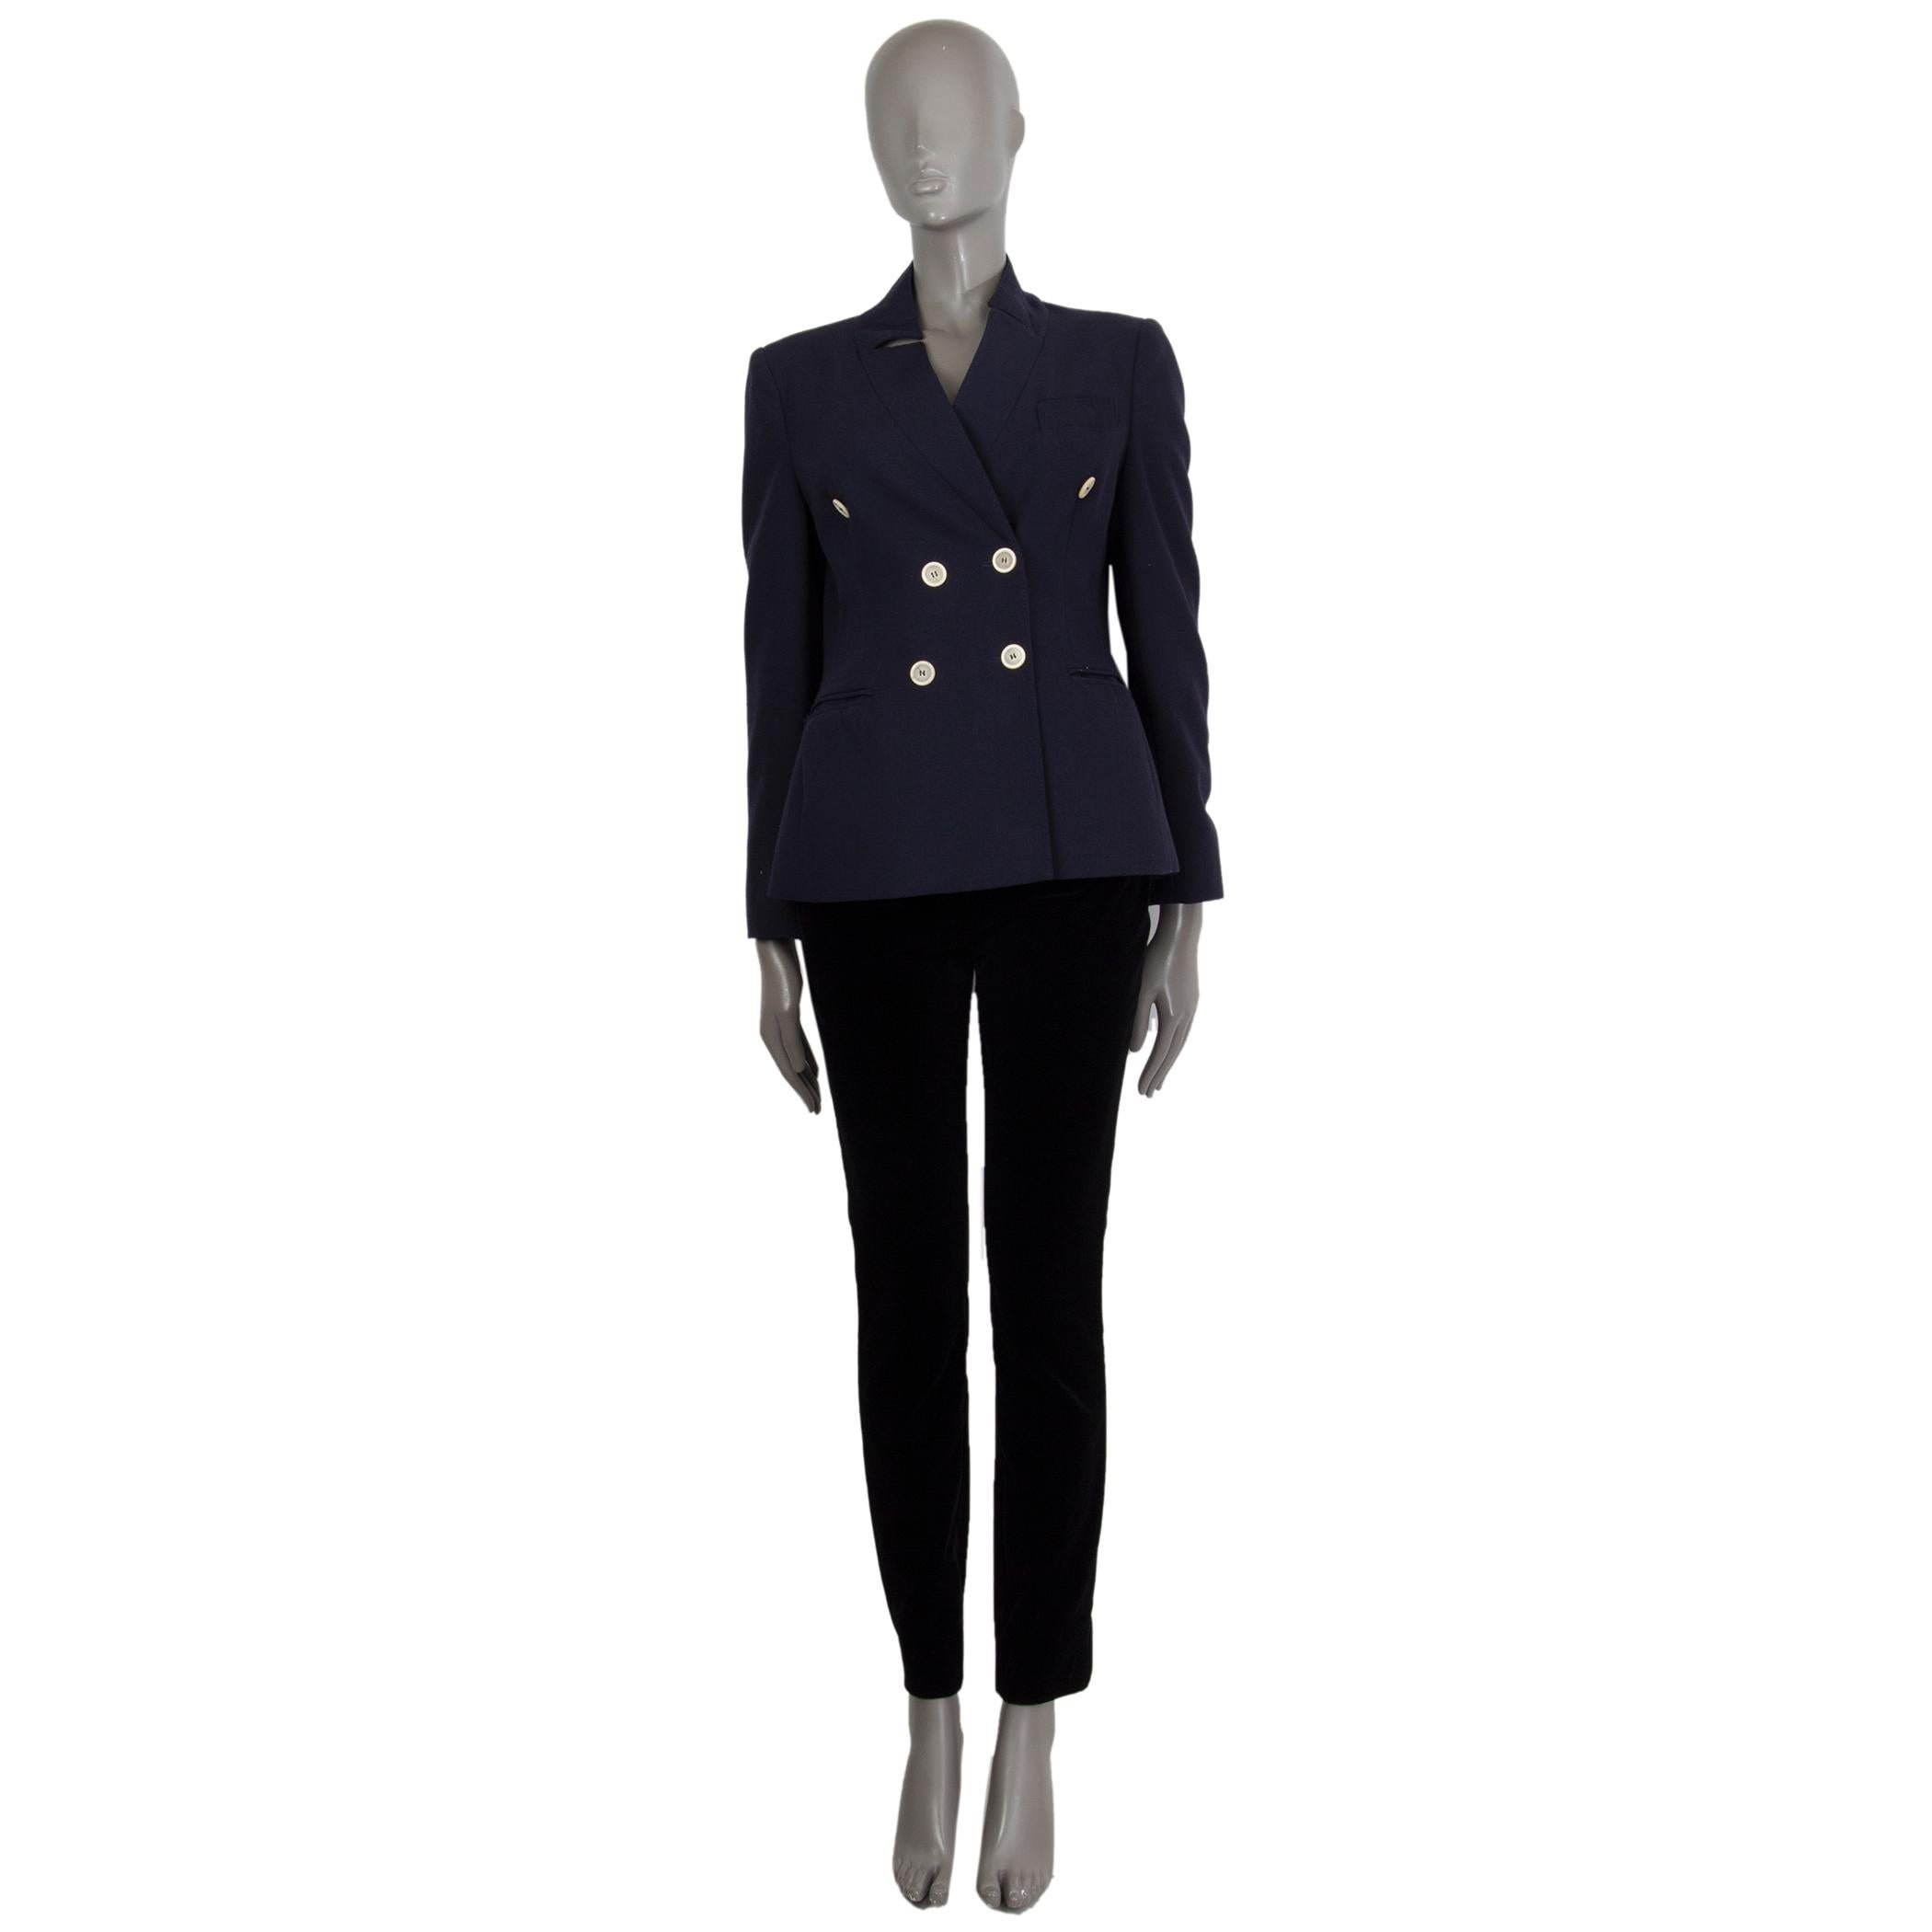 100% authentic Moschino double-breasted blazer in navy wool (100%). With notch collar, two gathered welt pockets on the front, and buttoned sleeves. Closes with ivory horn buttons on the front. Lined in black and red acetate (60%) and rayon (40%).